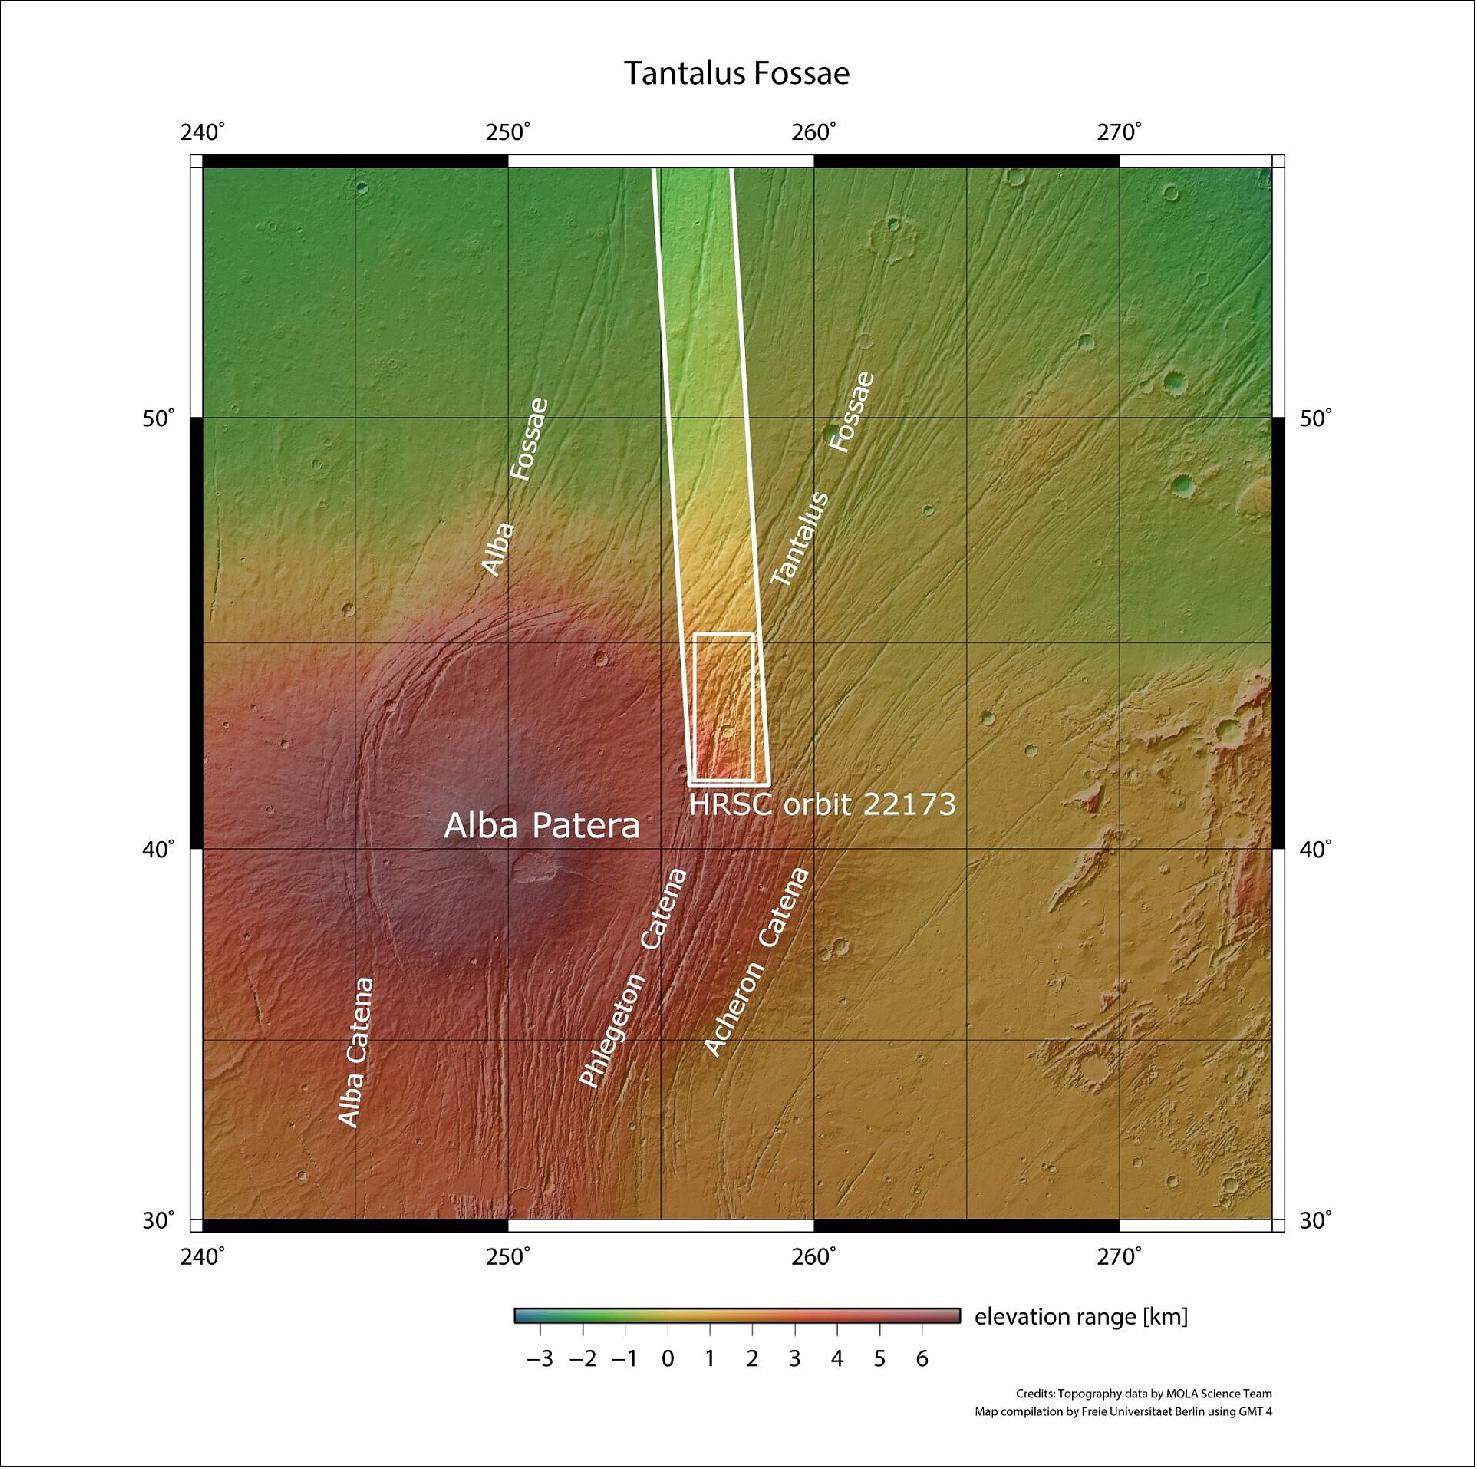 Figure 18: This image from ESA’s Mars Express shows part of Tantalus Fossae, a large system of faults found on Mars, in wider context. The area outlined by the bold white box indicates the area imaged by the Mars Express High Resolution Stereo Camera on 19 July 2021 during orbit 22173 (image credit: NASA/MGS/MOLA Science Team)